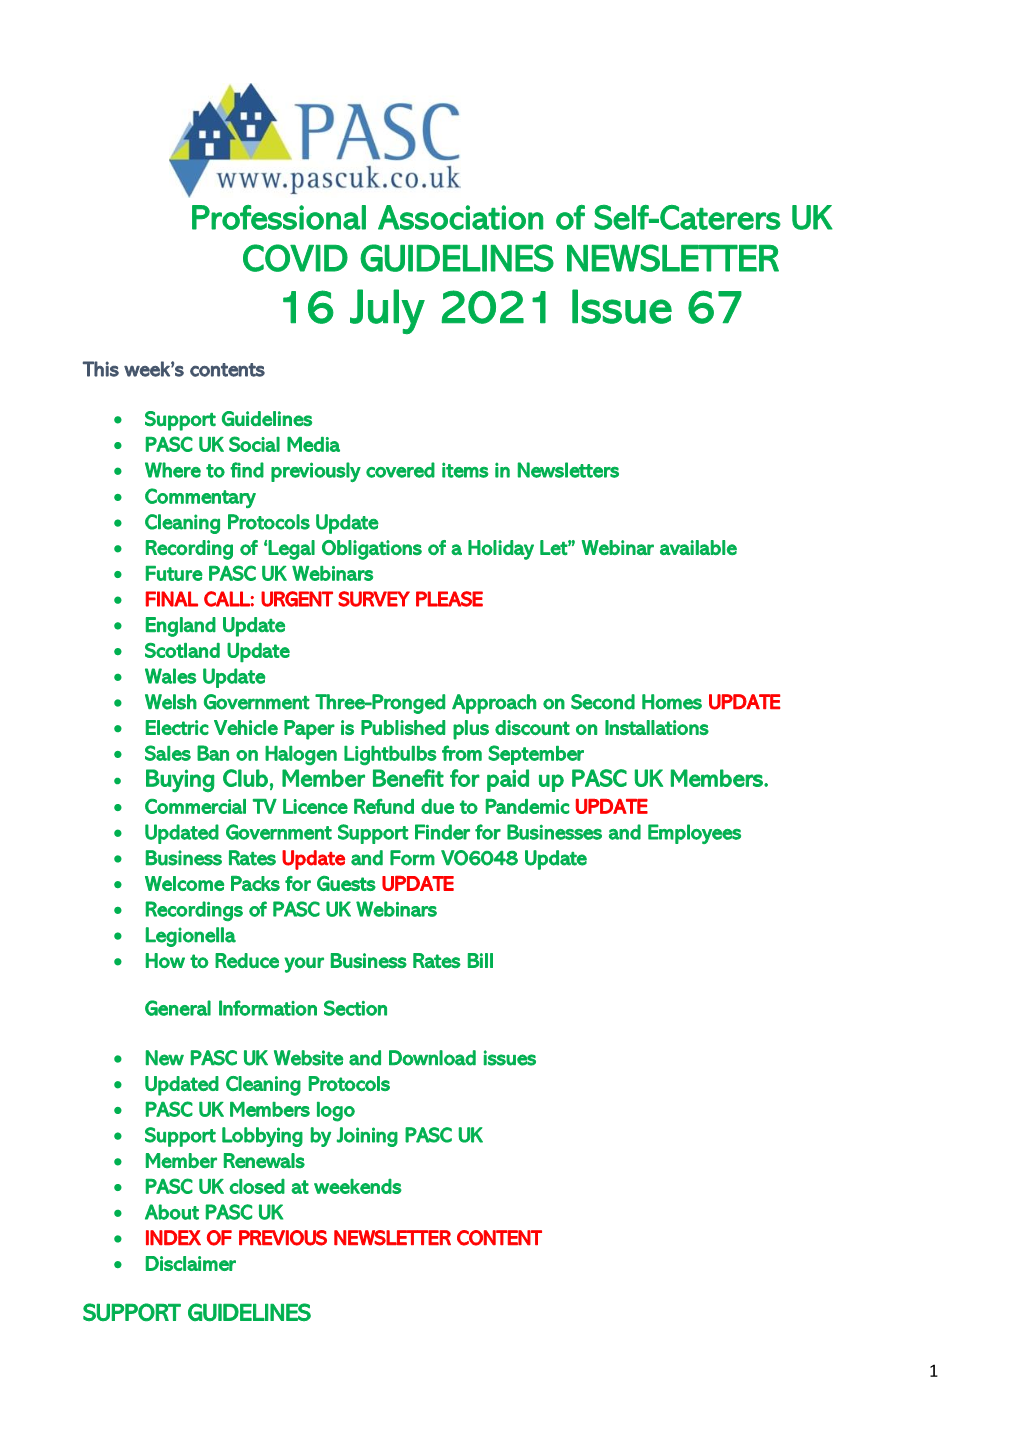 COVID GUIDELINES NEWSLETTER 16 July 2021 Issue 67